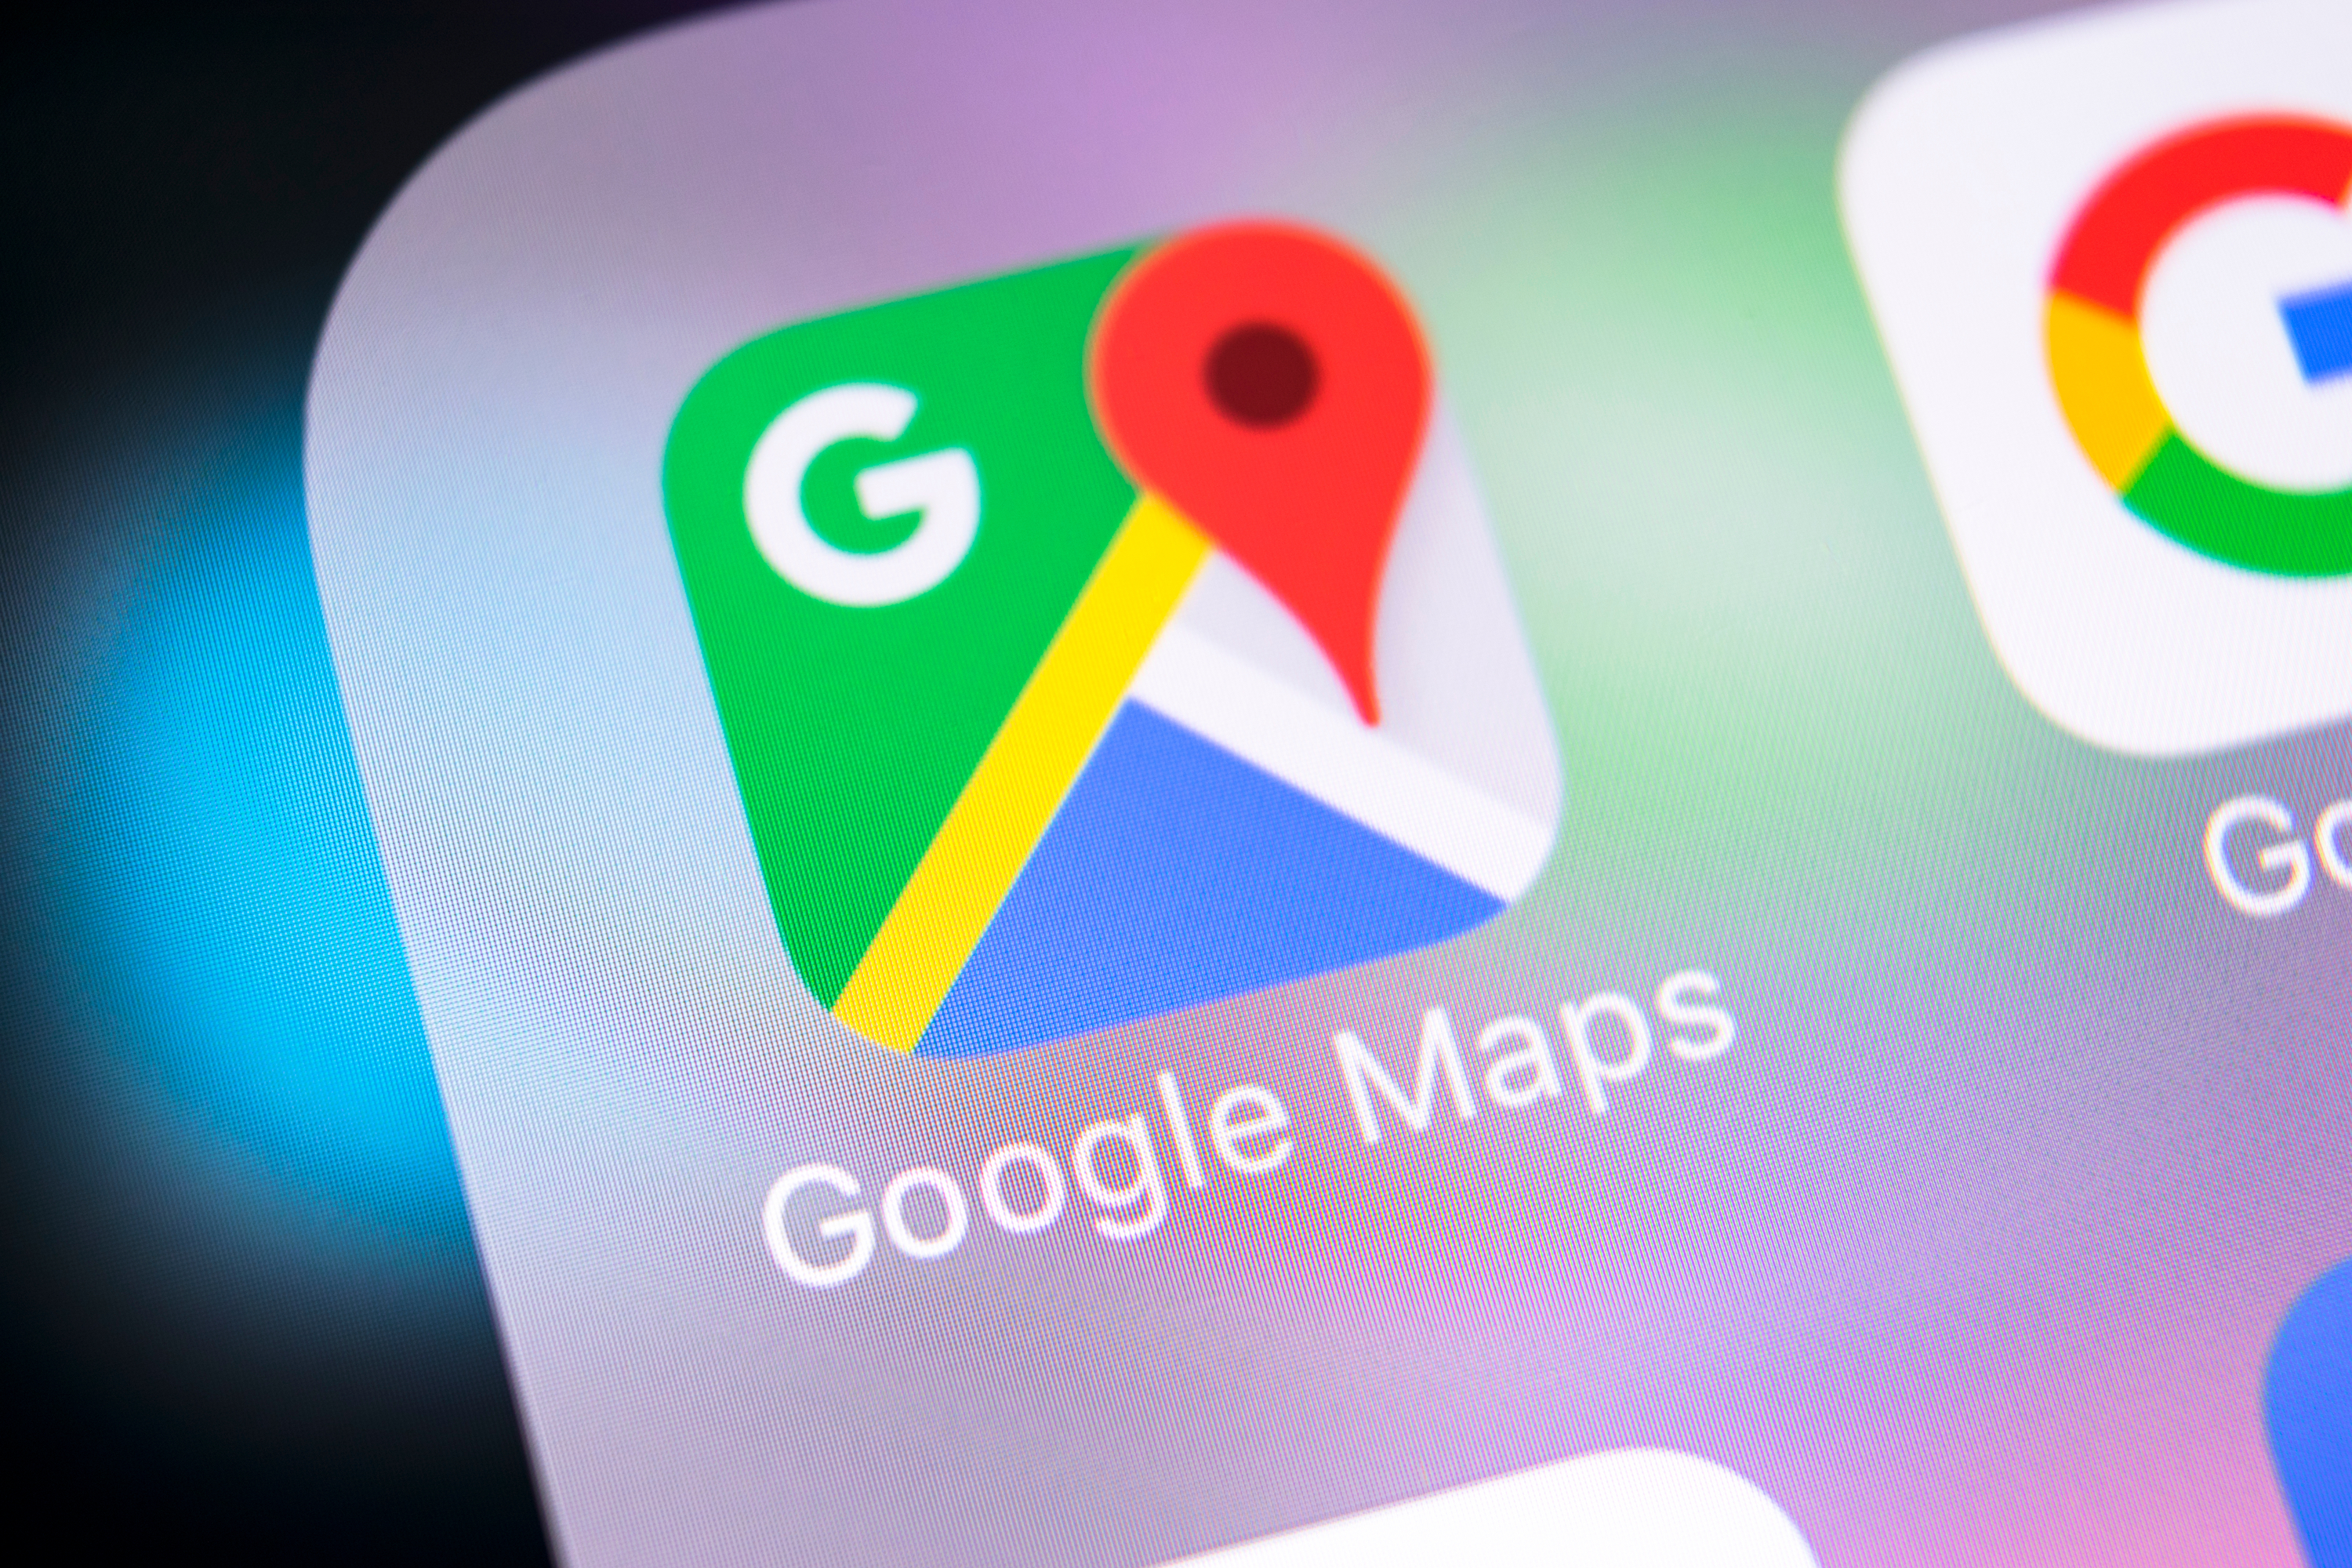 Google Maps app icon on a device